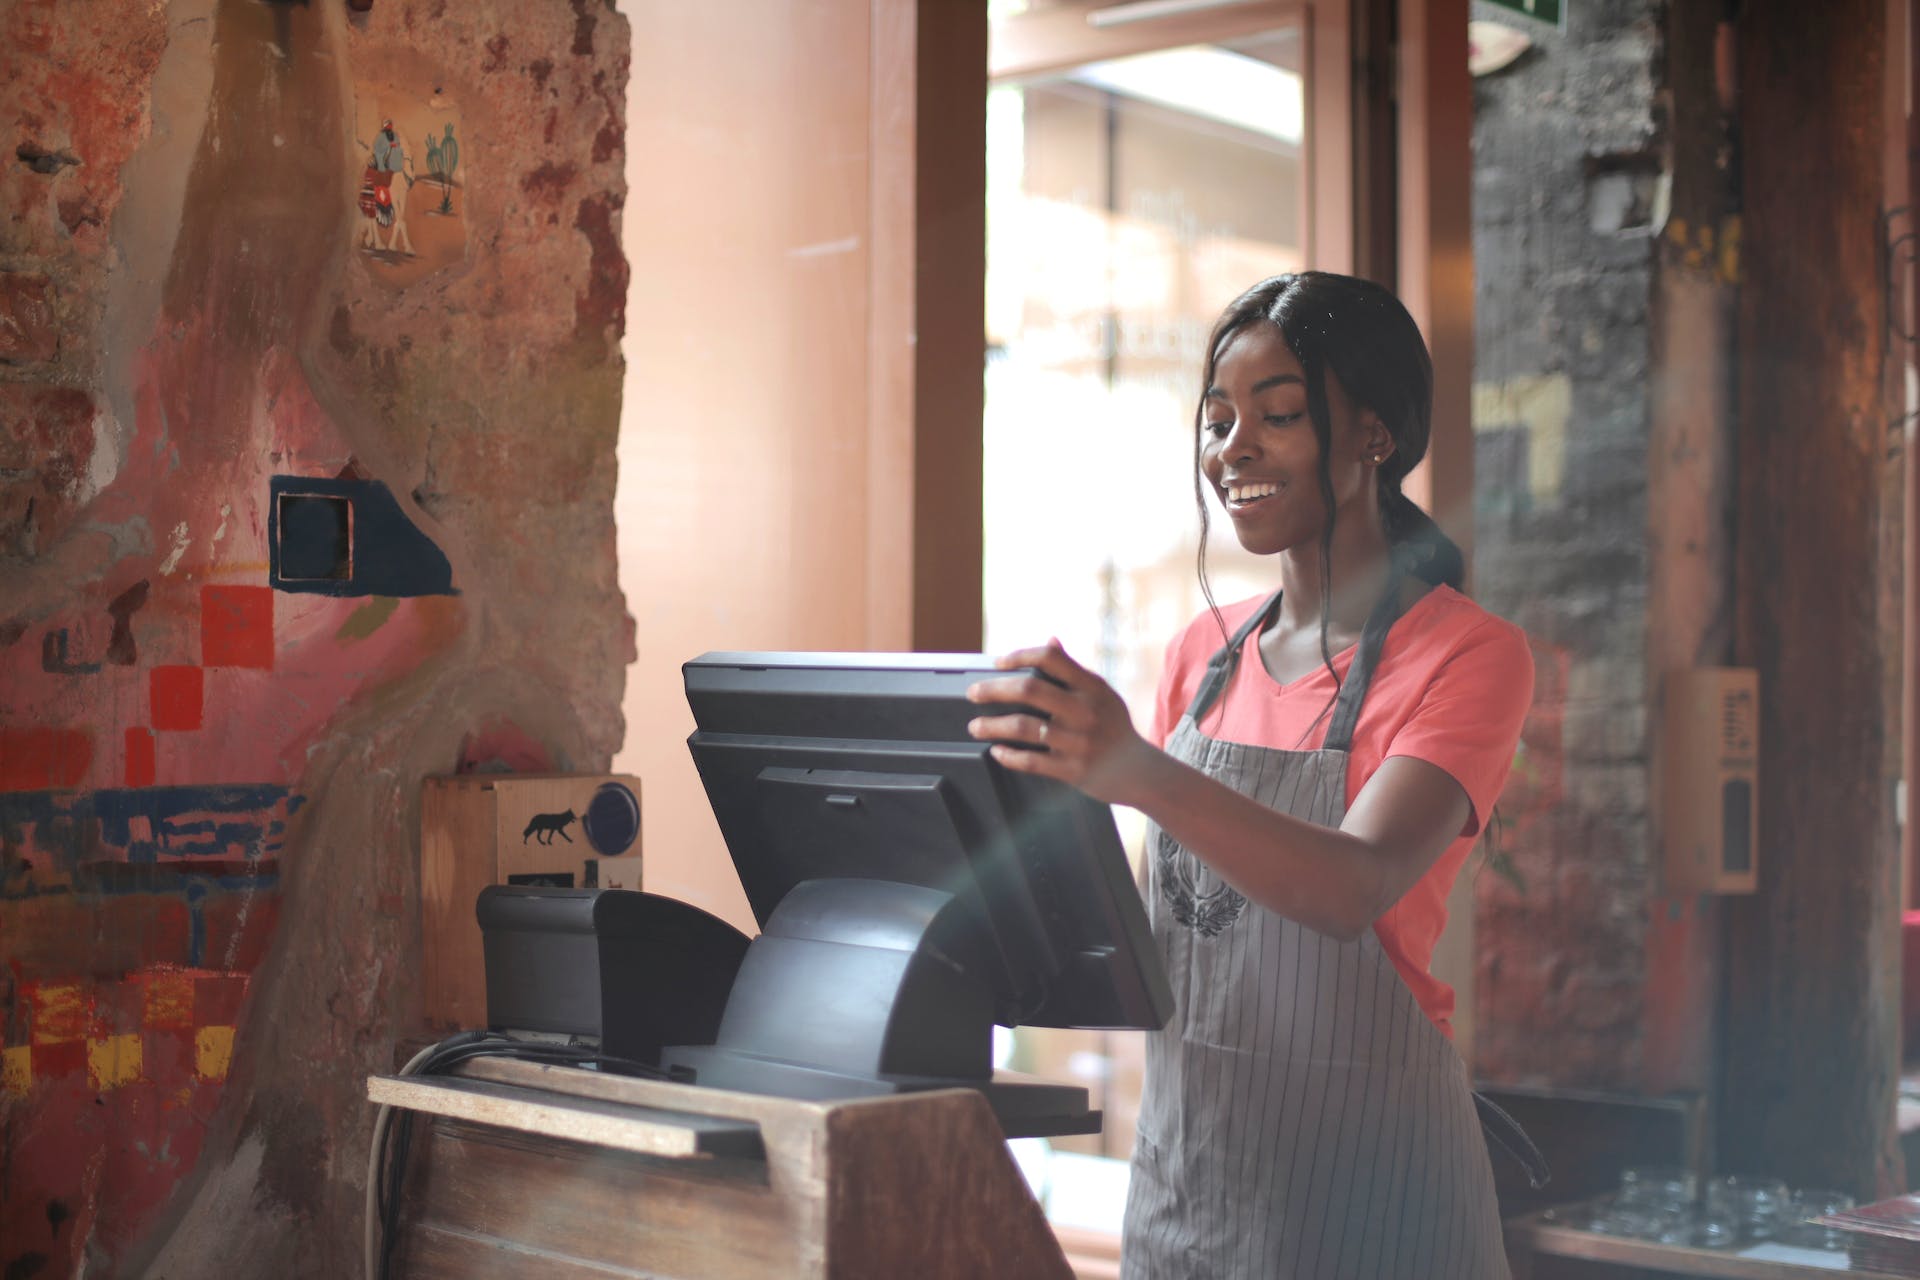 A woman working at a cash counter | Source: Pexels